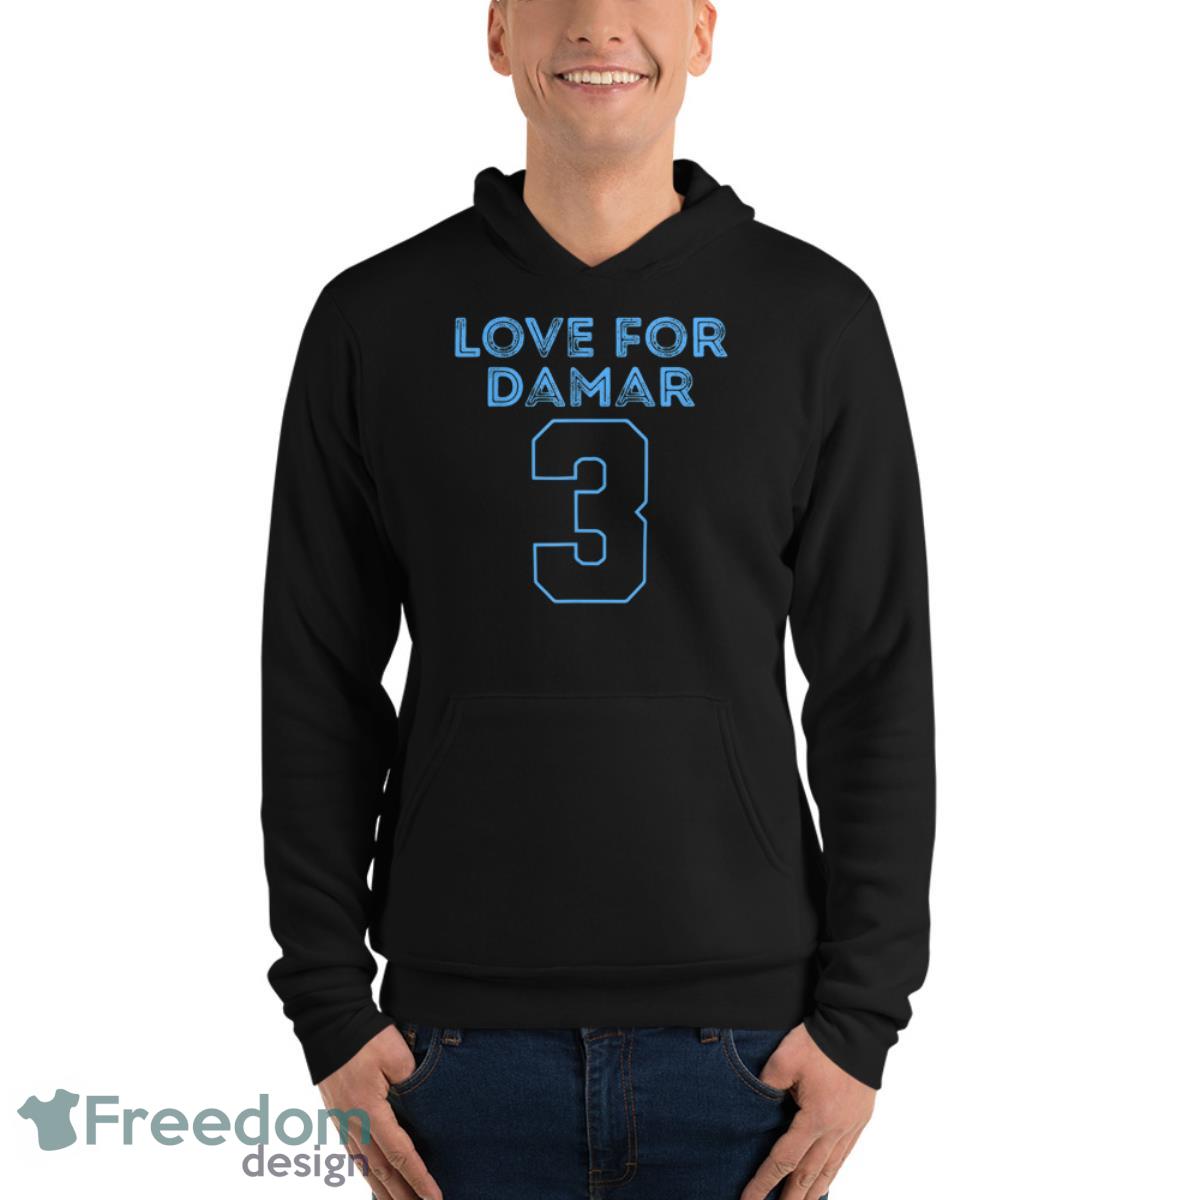 Pray for Damar 3 Buffalo Love For 3 We are with you T Shirt